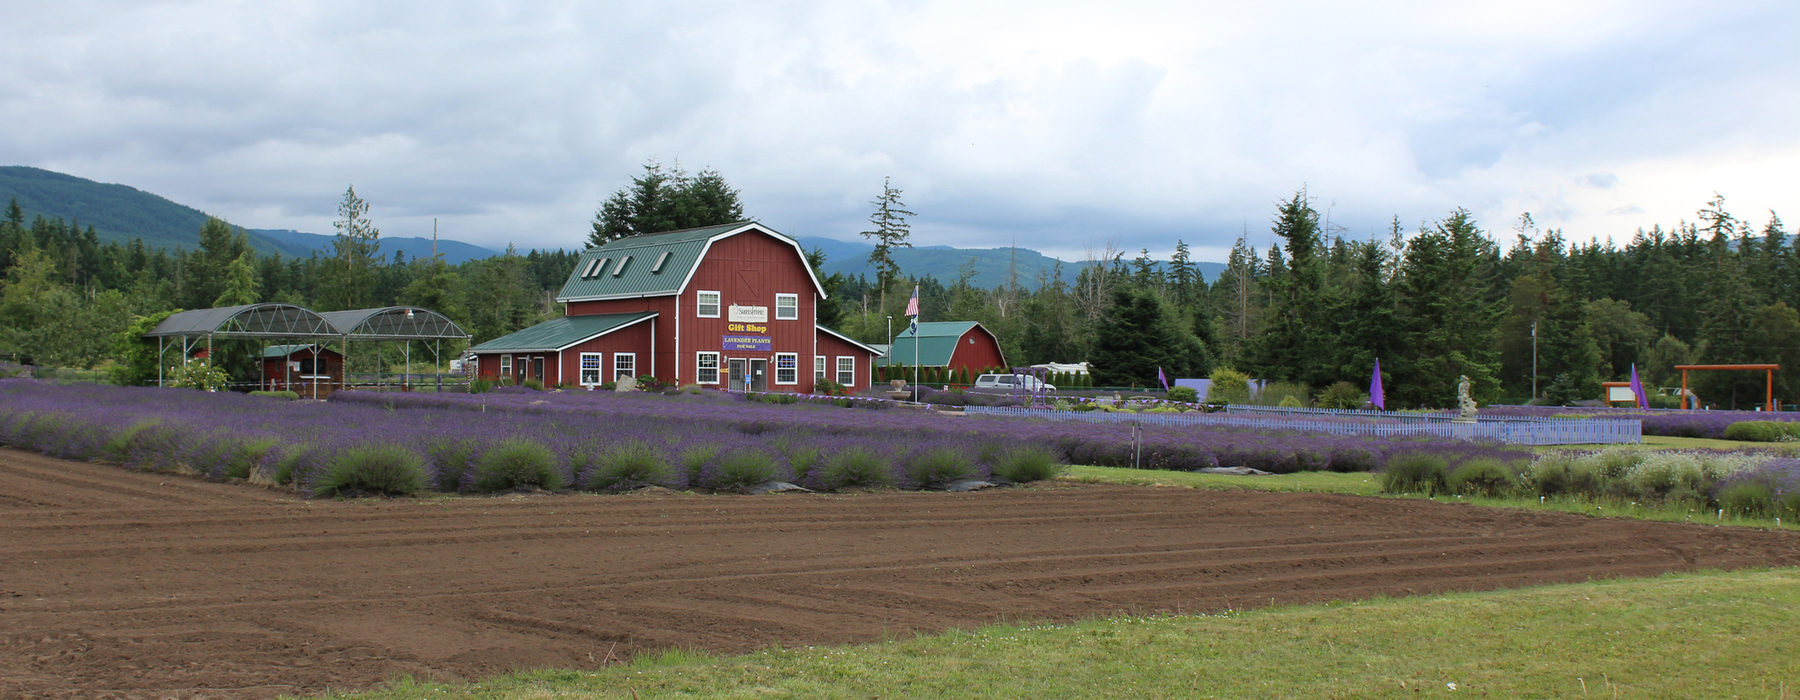 Red barn with conifers behind, and mountains further behind, and purple colored plants in rows in front of the barn